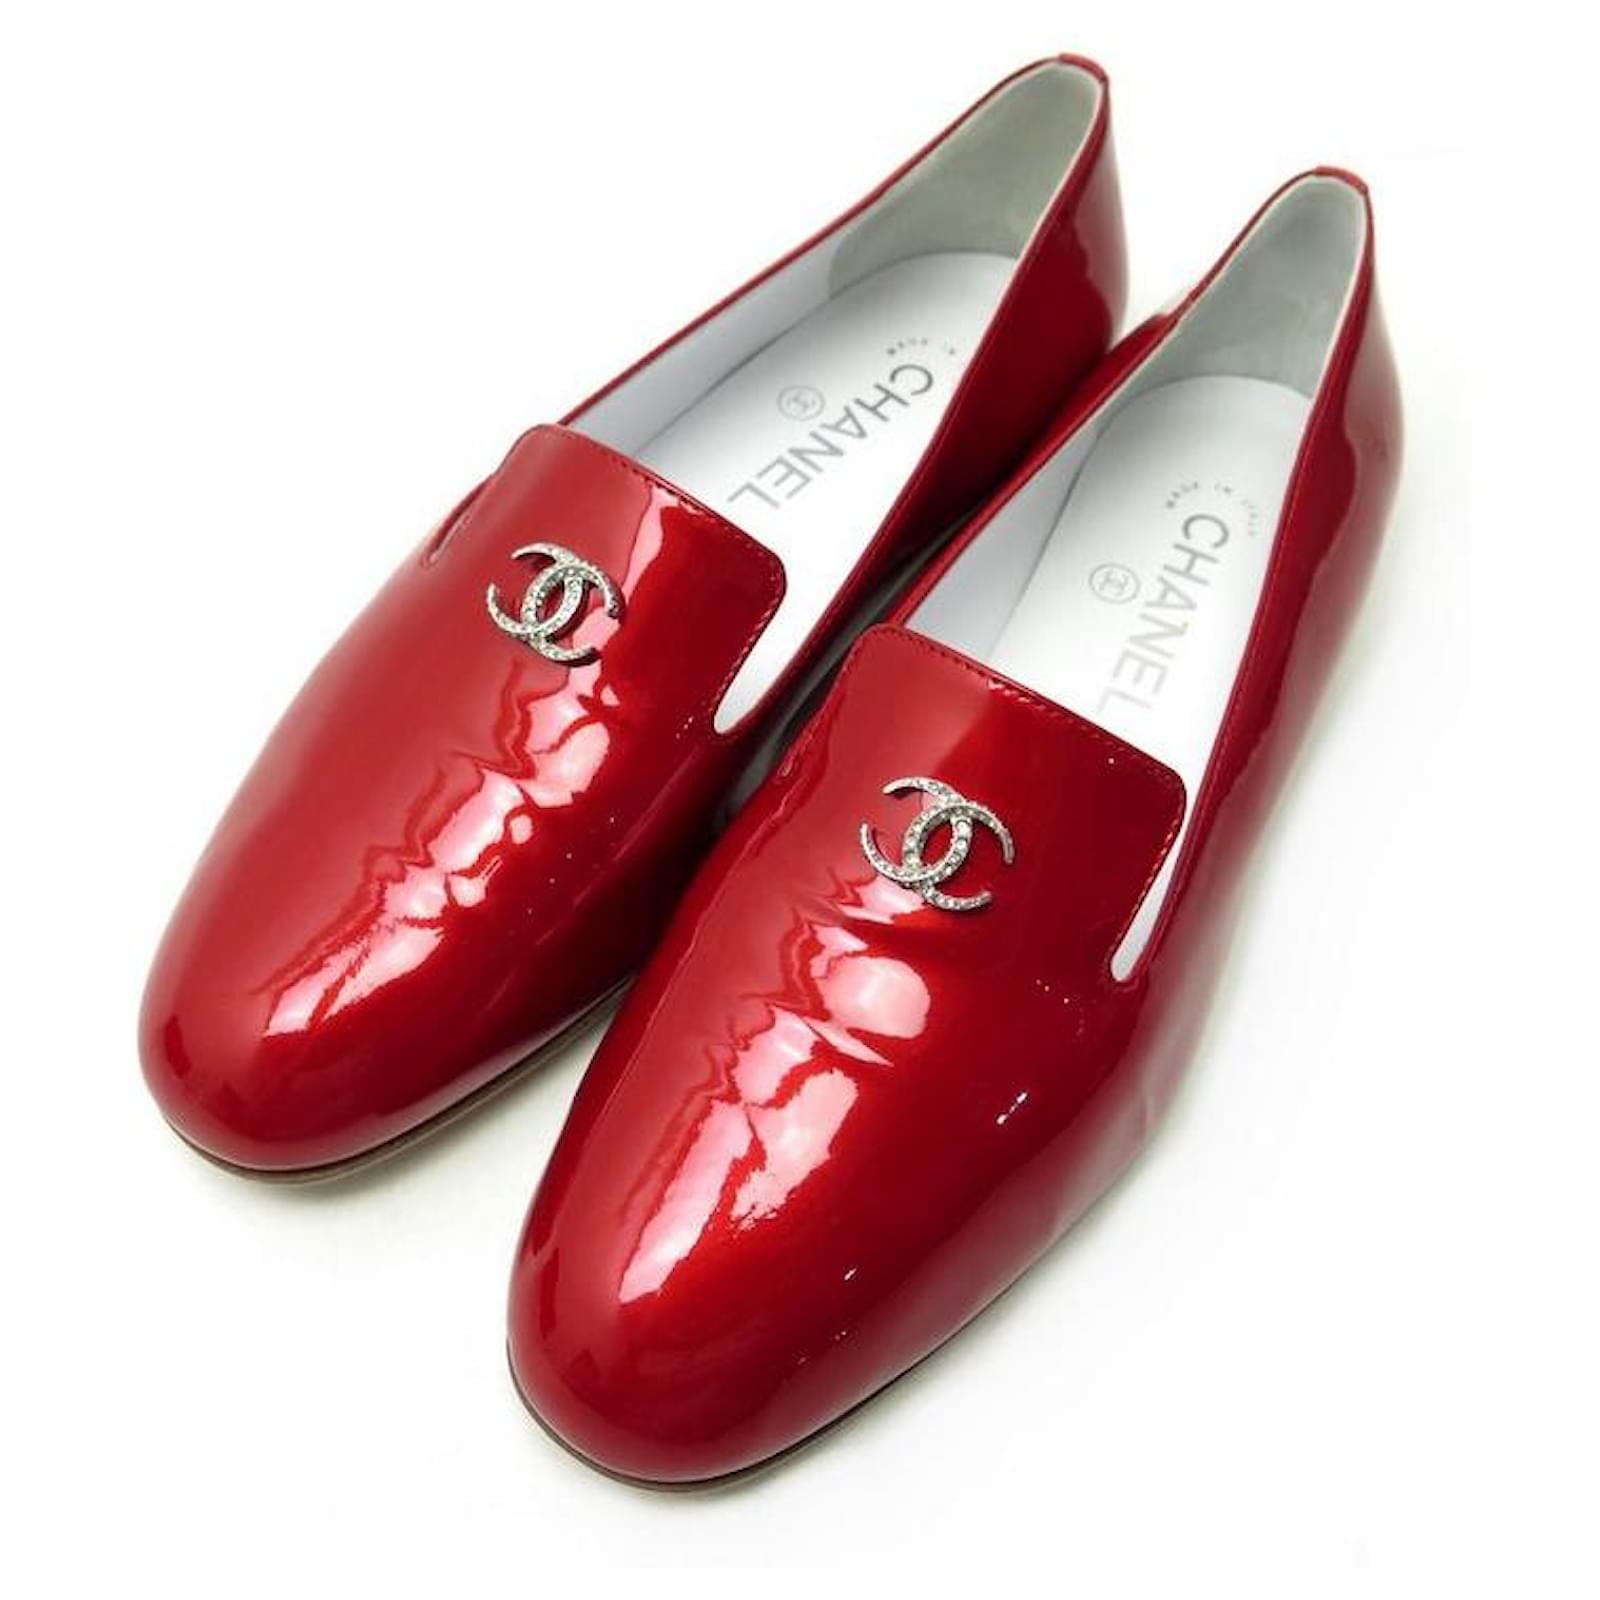 NEW CHANEL MOCASSINS CC G LOGO SHOES30637 38 RED PATENT LEATHER